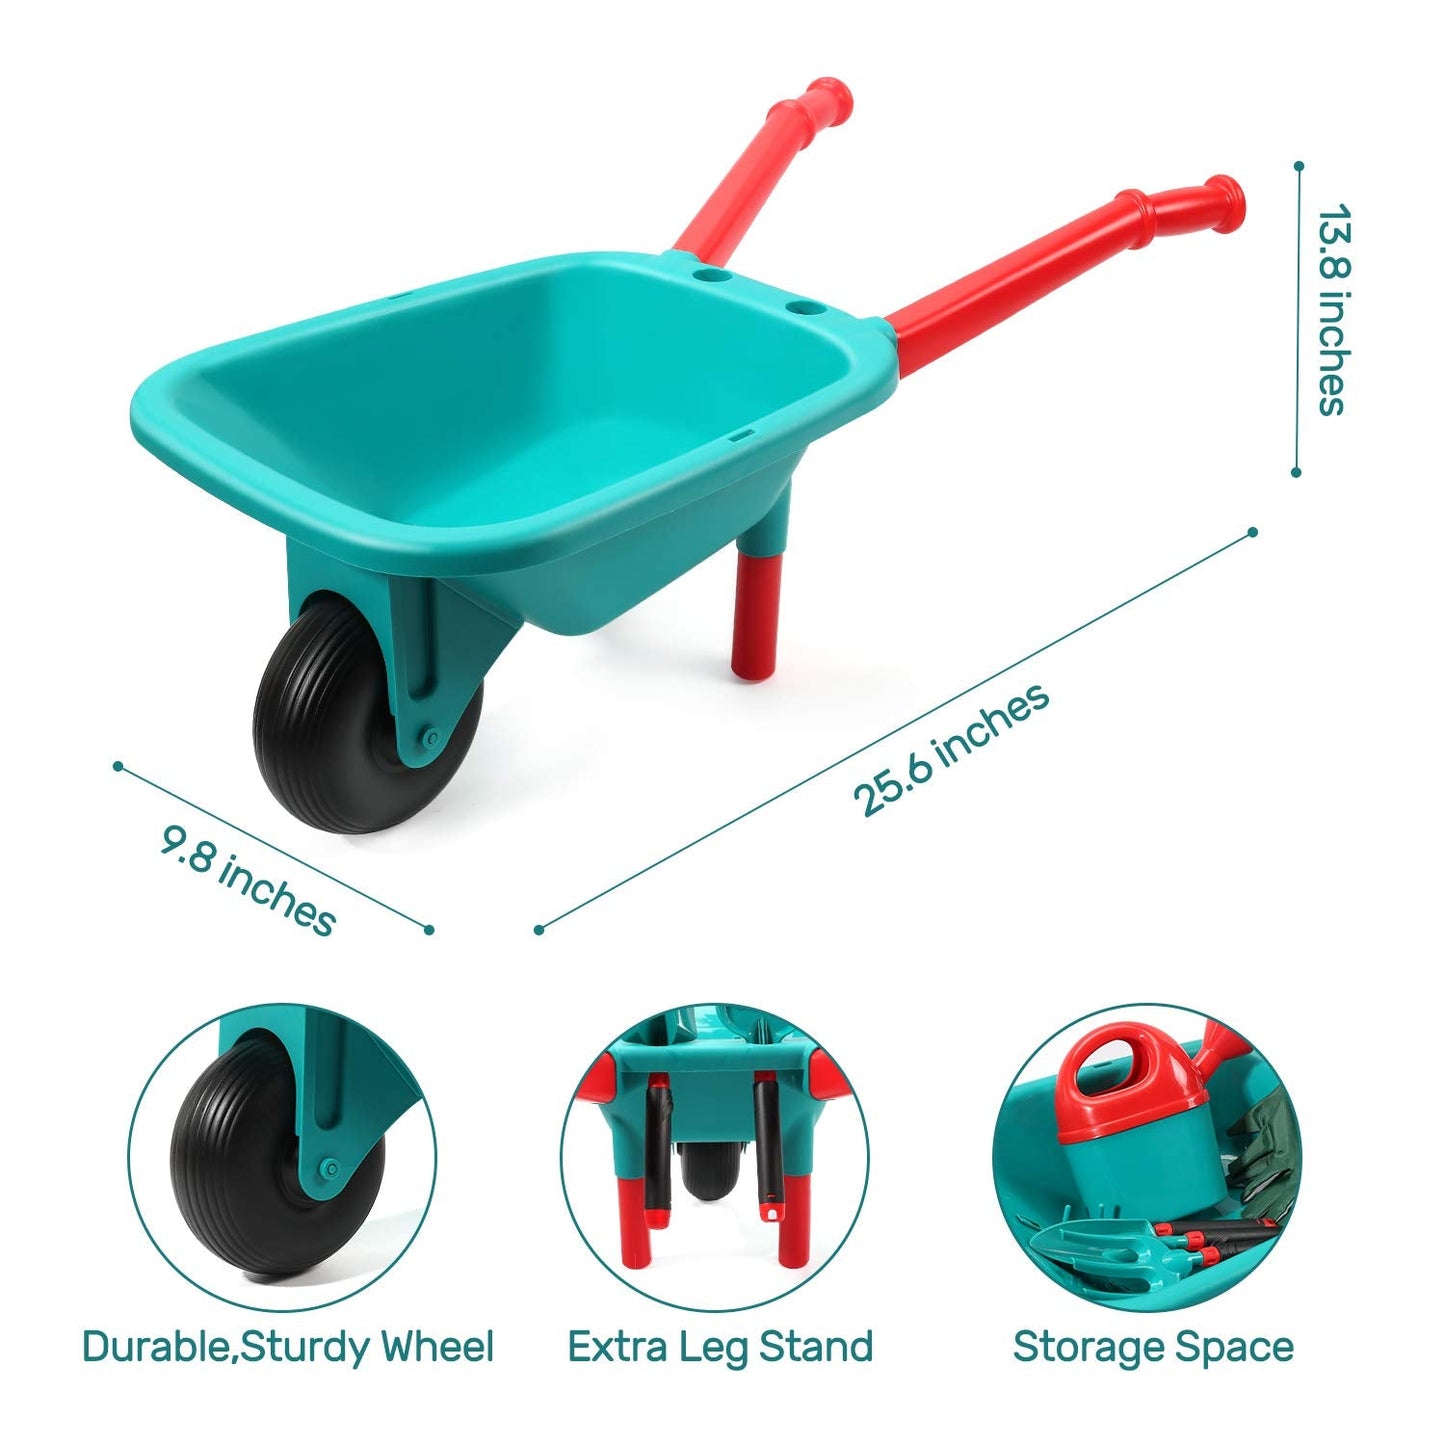 Kids Gardening Tool Set, Garden Toys with Wheelbarrow, Watering Can, Gardening Gloves, Hand Rake, Shovel, Trowel, Double Hoe, Apron with Pockets